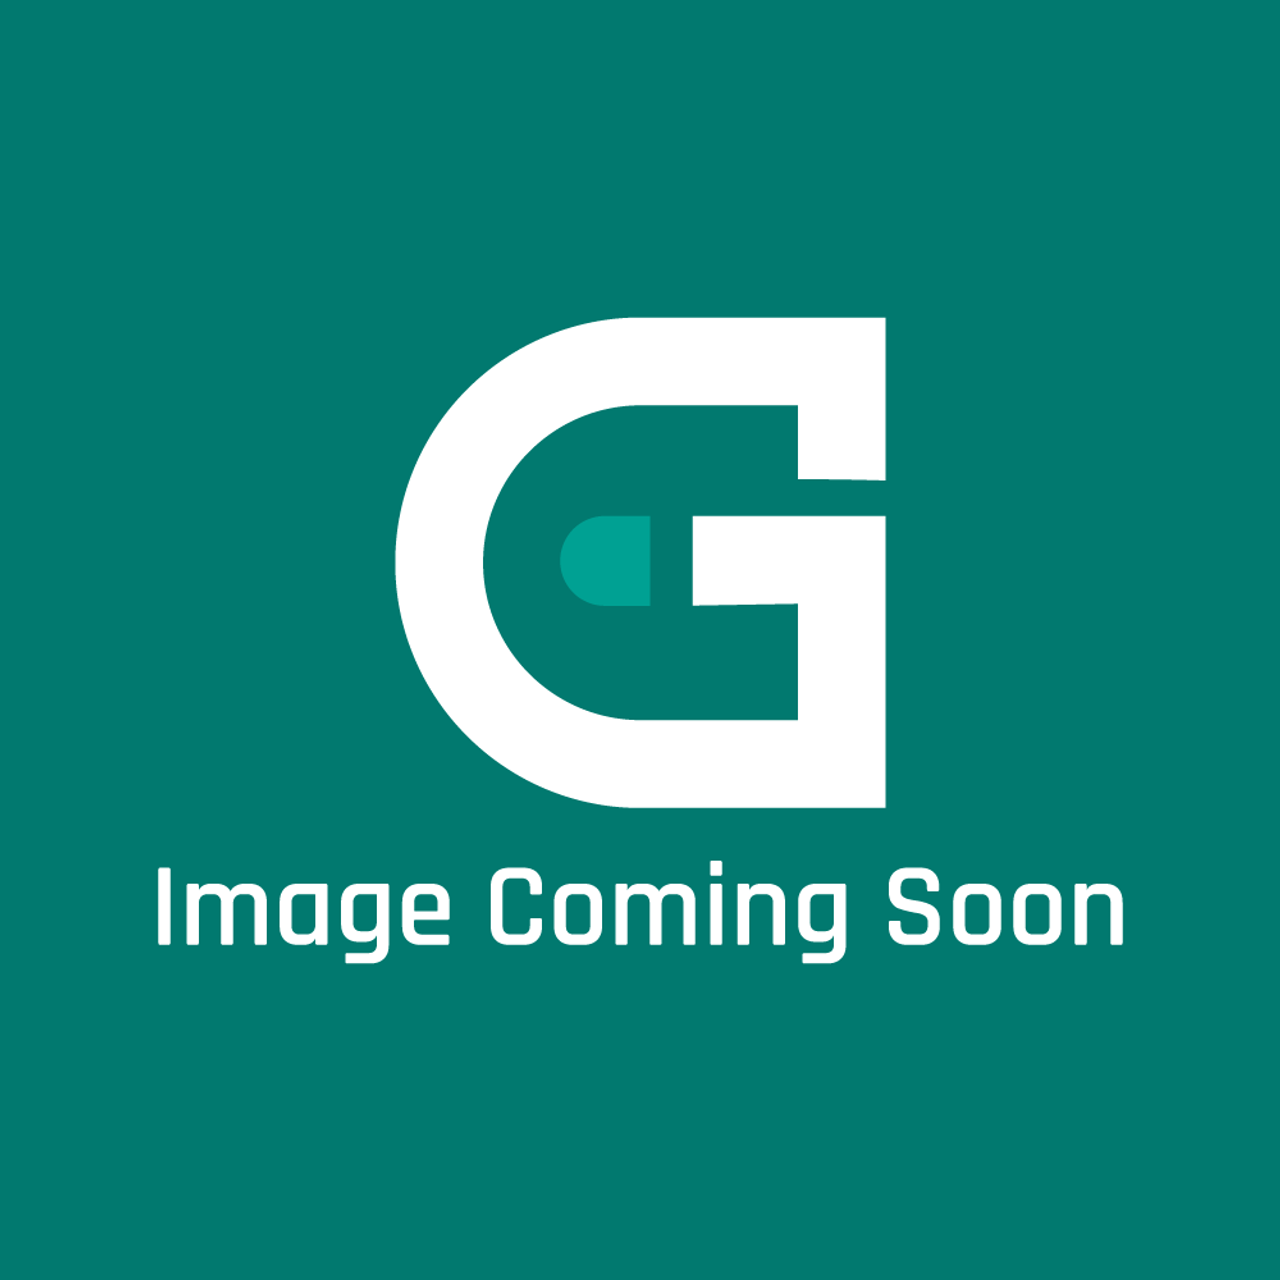 AGA Marvel G1110 - 4-1/4X11/4Eng Stud-Blr Cover - Image Coming Soon!